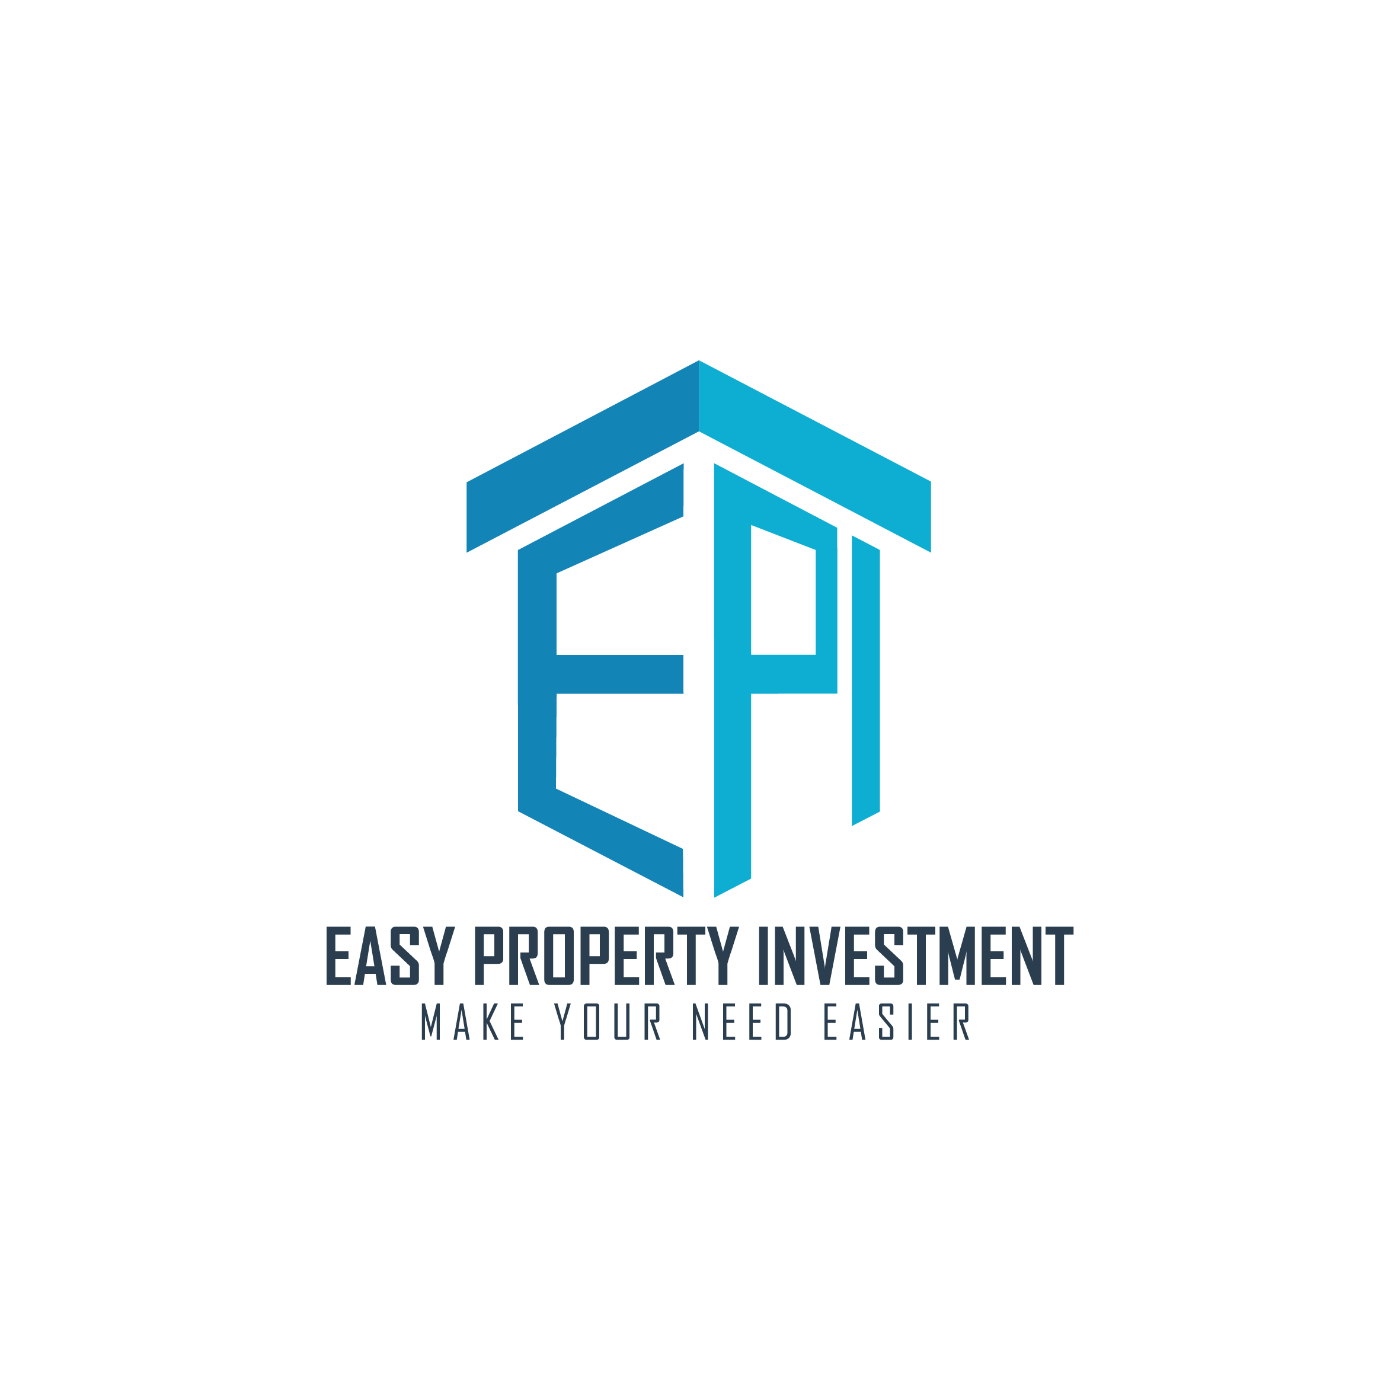 Easy Property Investment